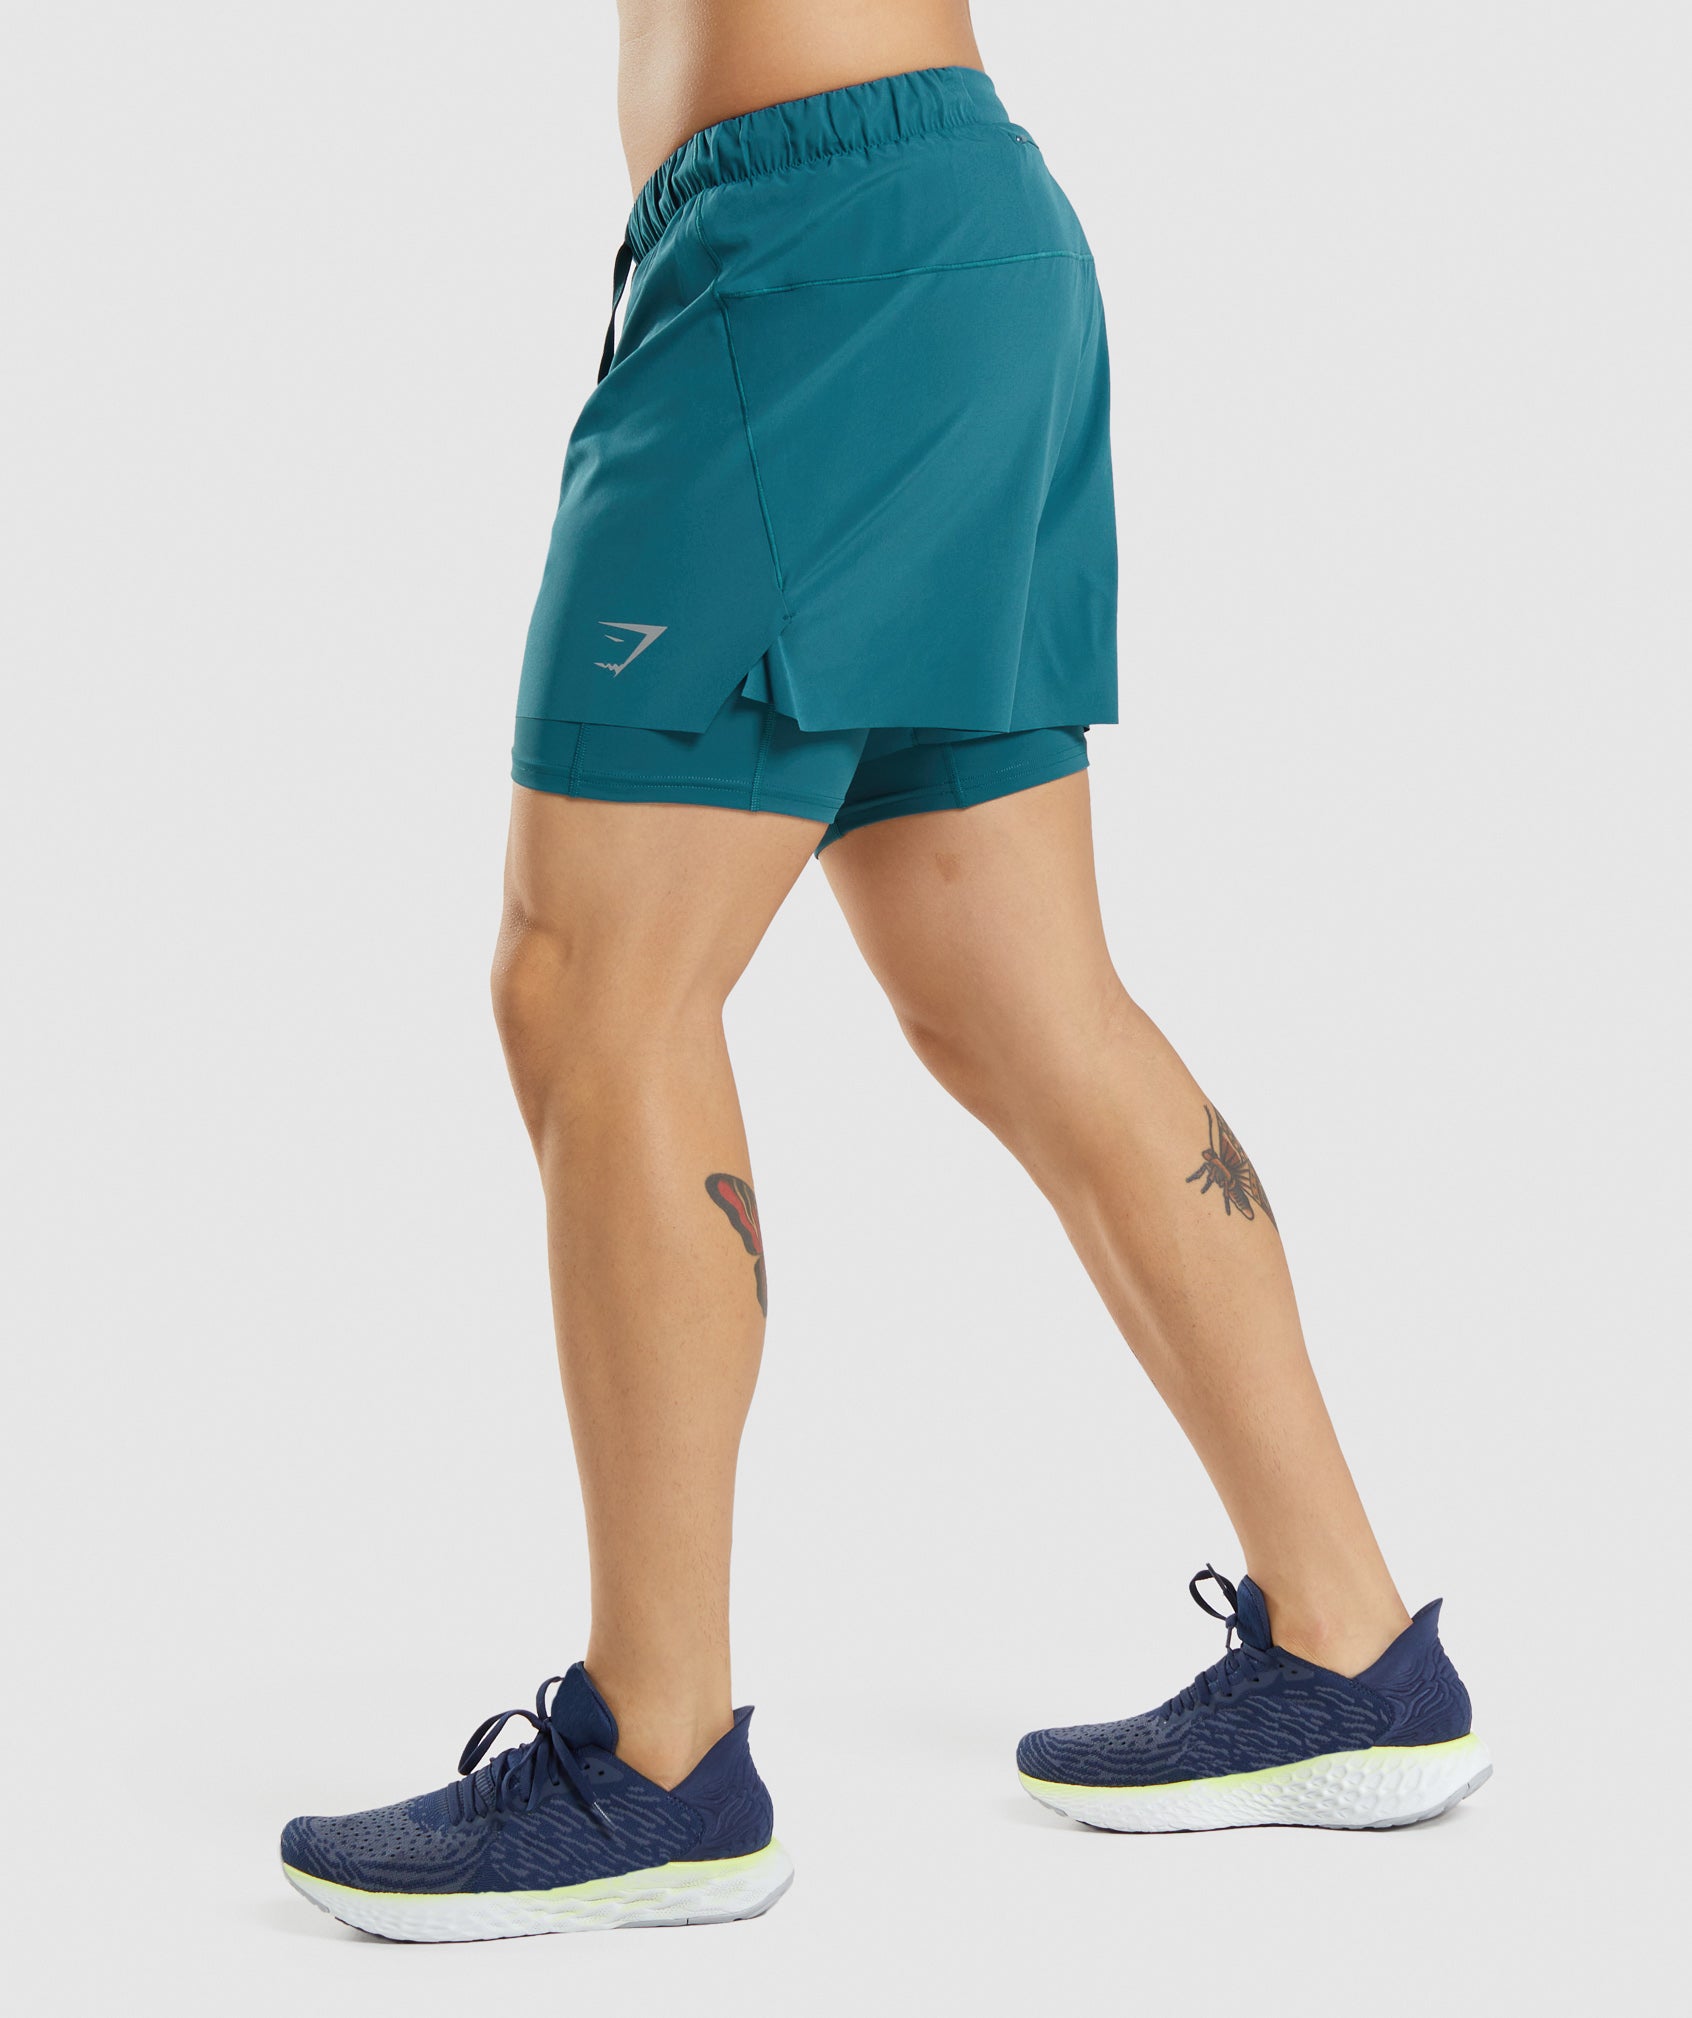 Speed 5" 2 in 1 Shorts in Teal - view 3